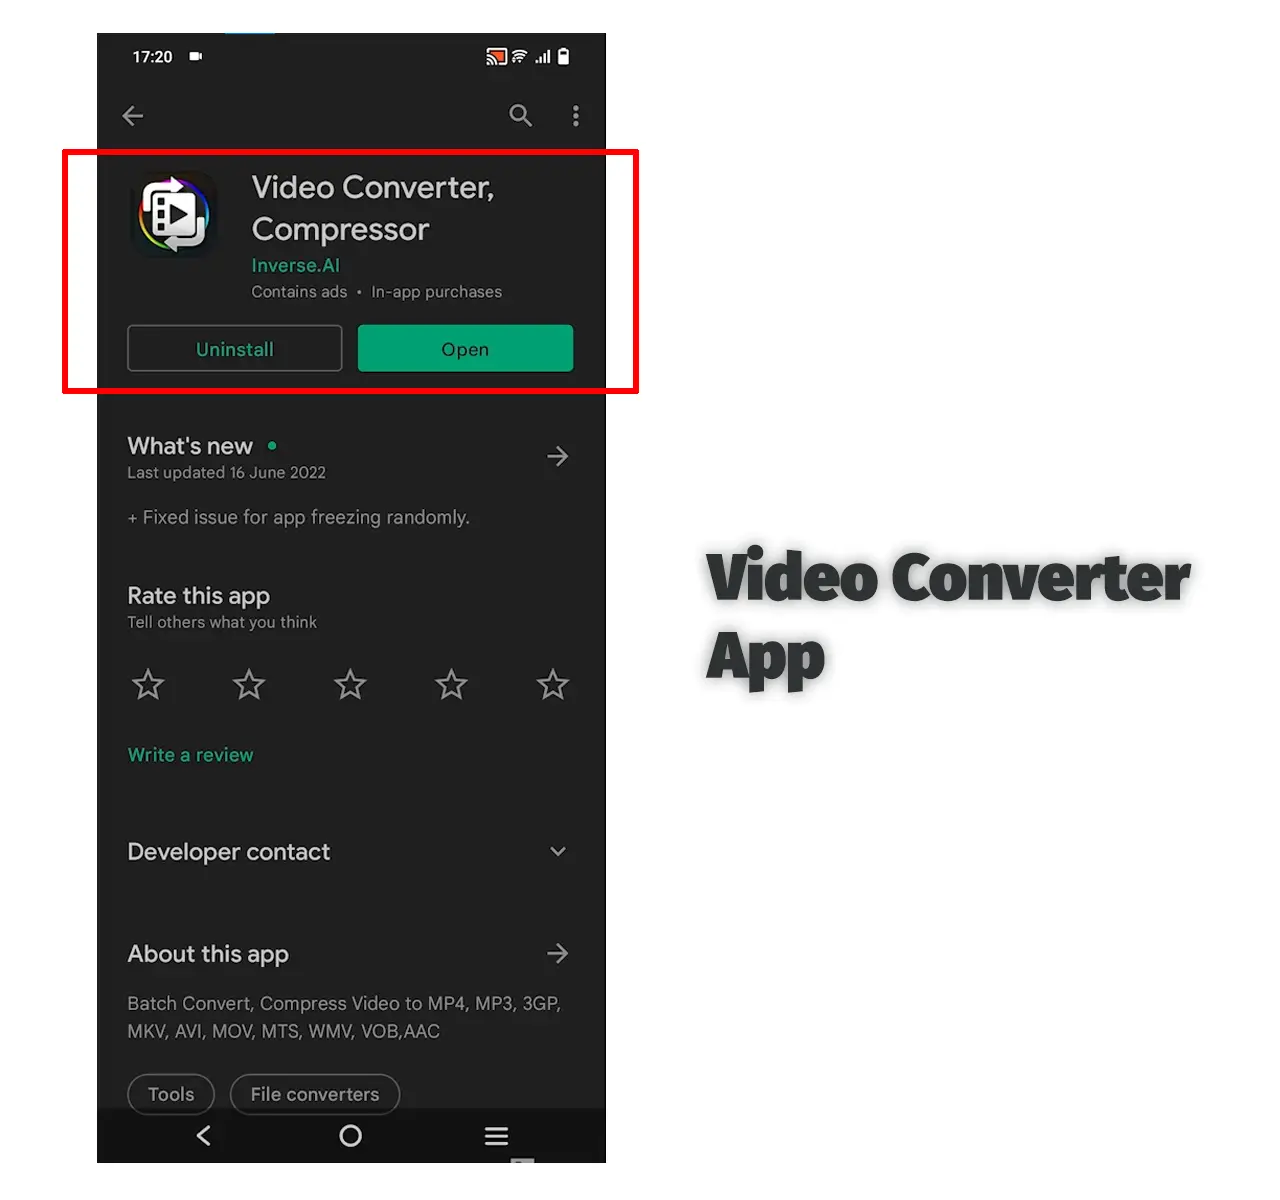 Video Converter By Inverse